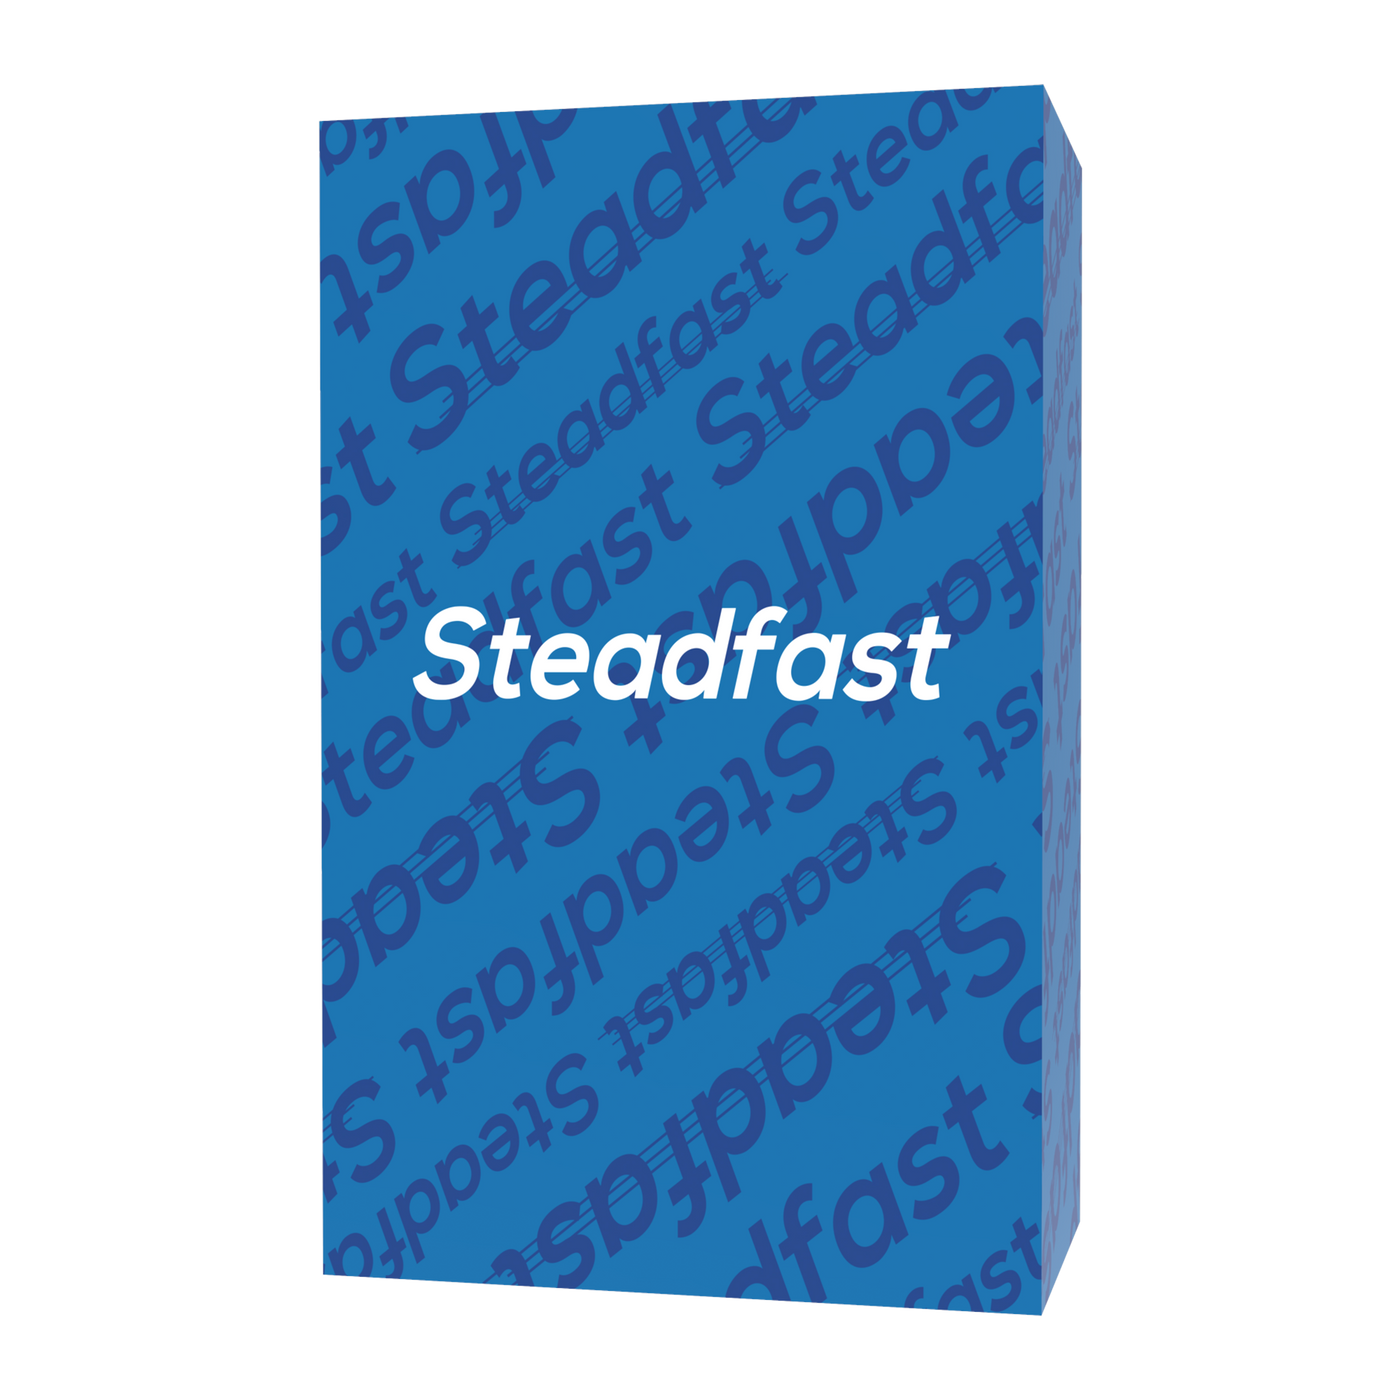 Steadfast X Playing Cards